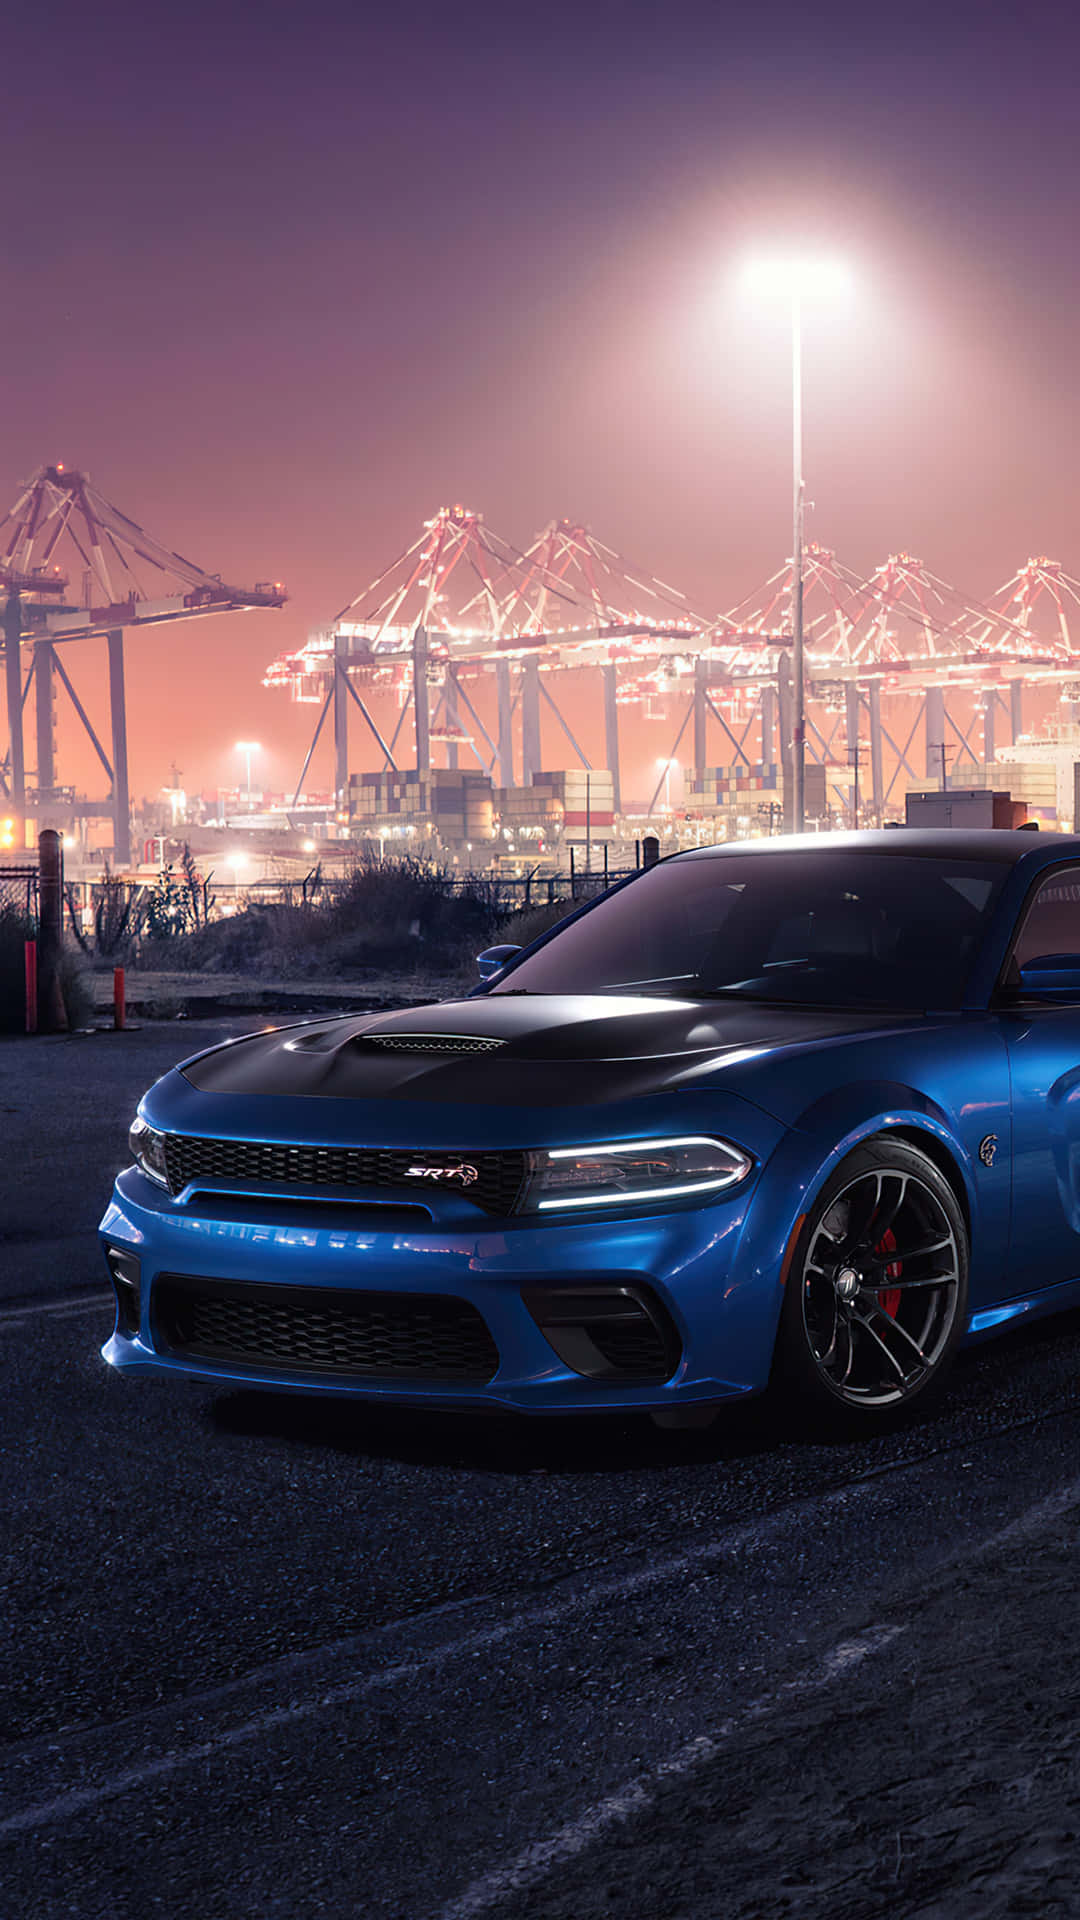 Get Ready to Upgrade Your Smartphone to the Latest Hellcat Iphone Wallpaper